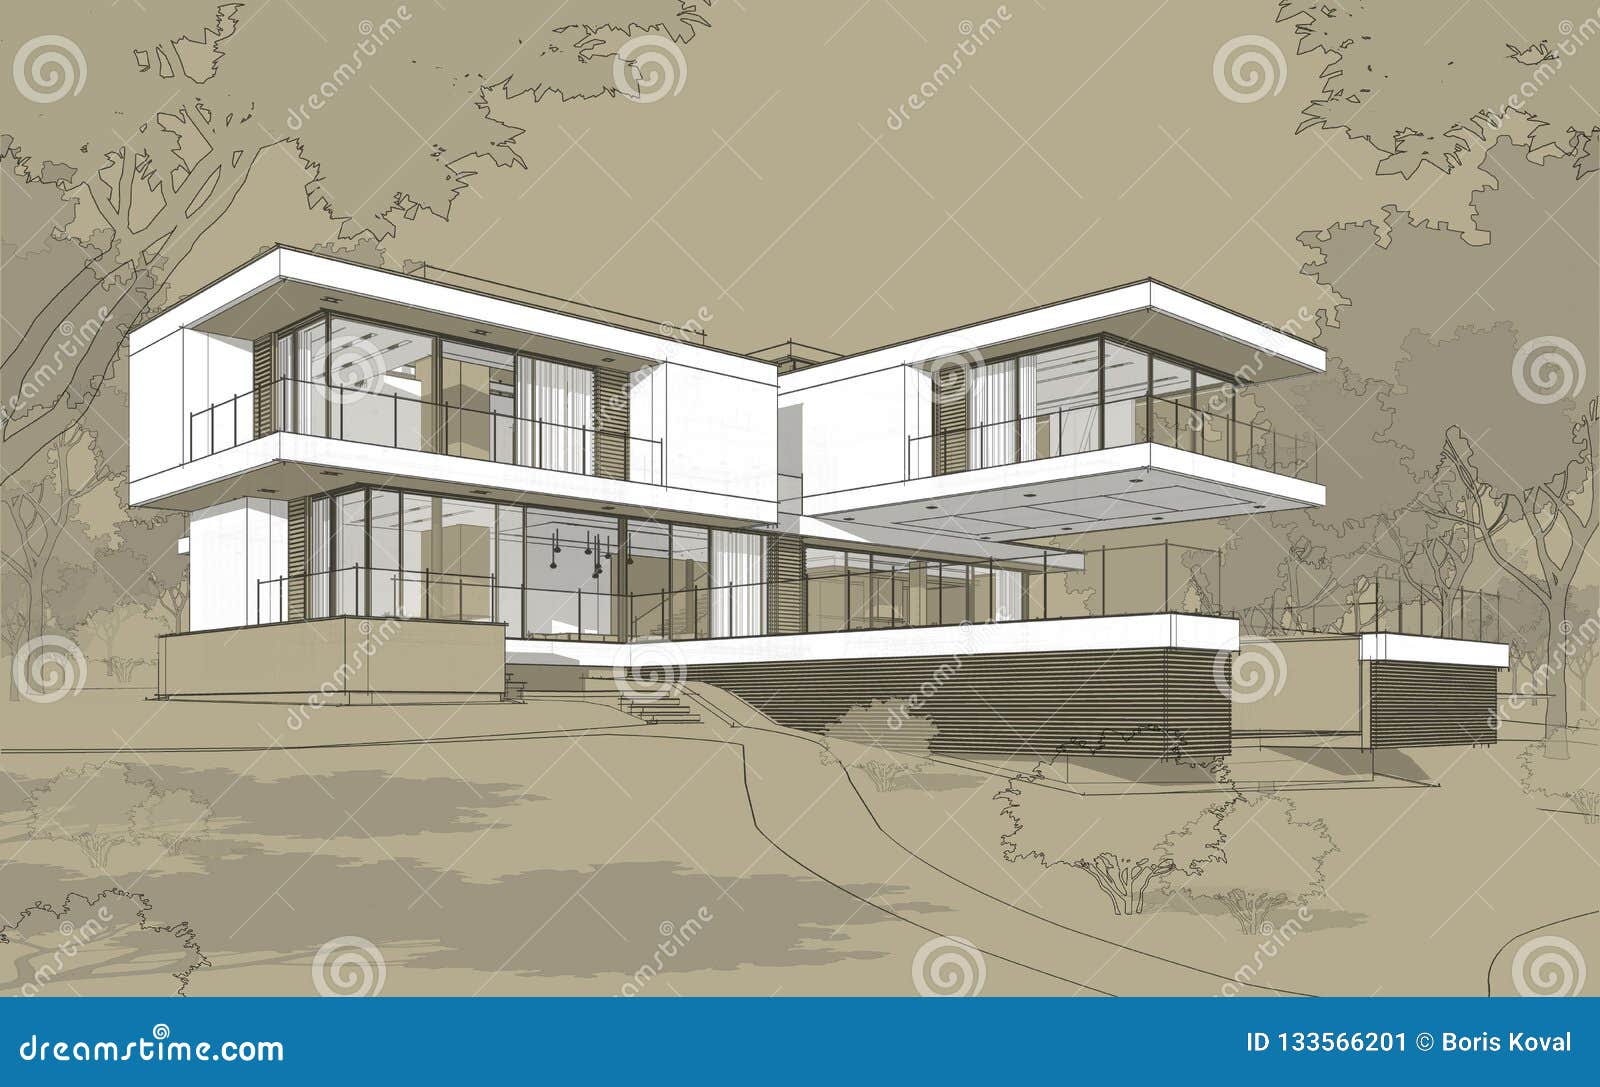 97,200+ House Sketch Illustrations, Royalty-Free Vector Graphics & Clip Art  - iStock | House sketch icon, House sketch vector, Sydney opera house sketch